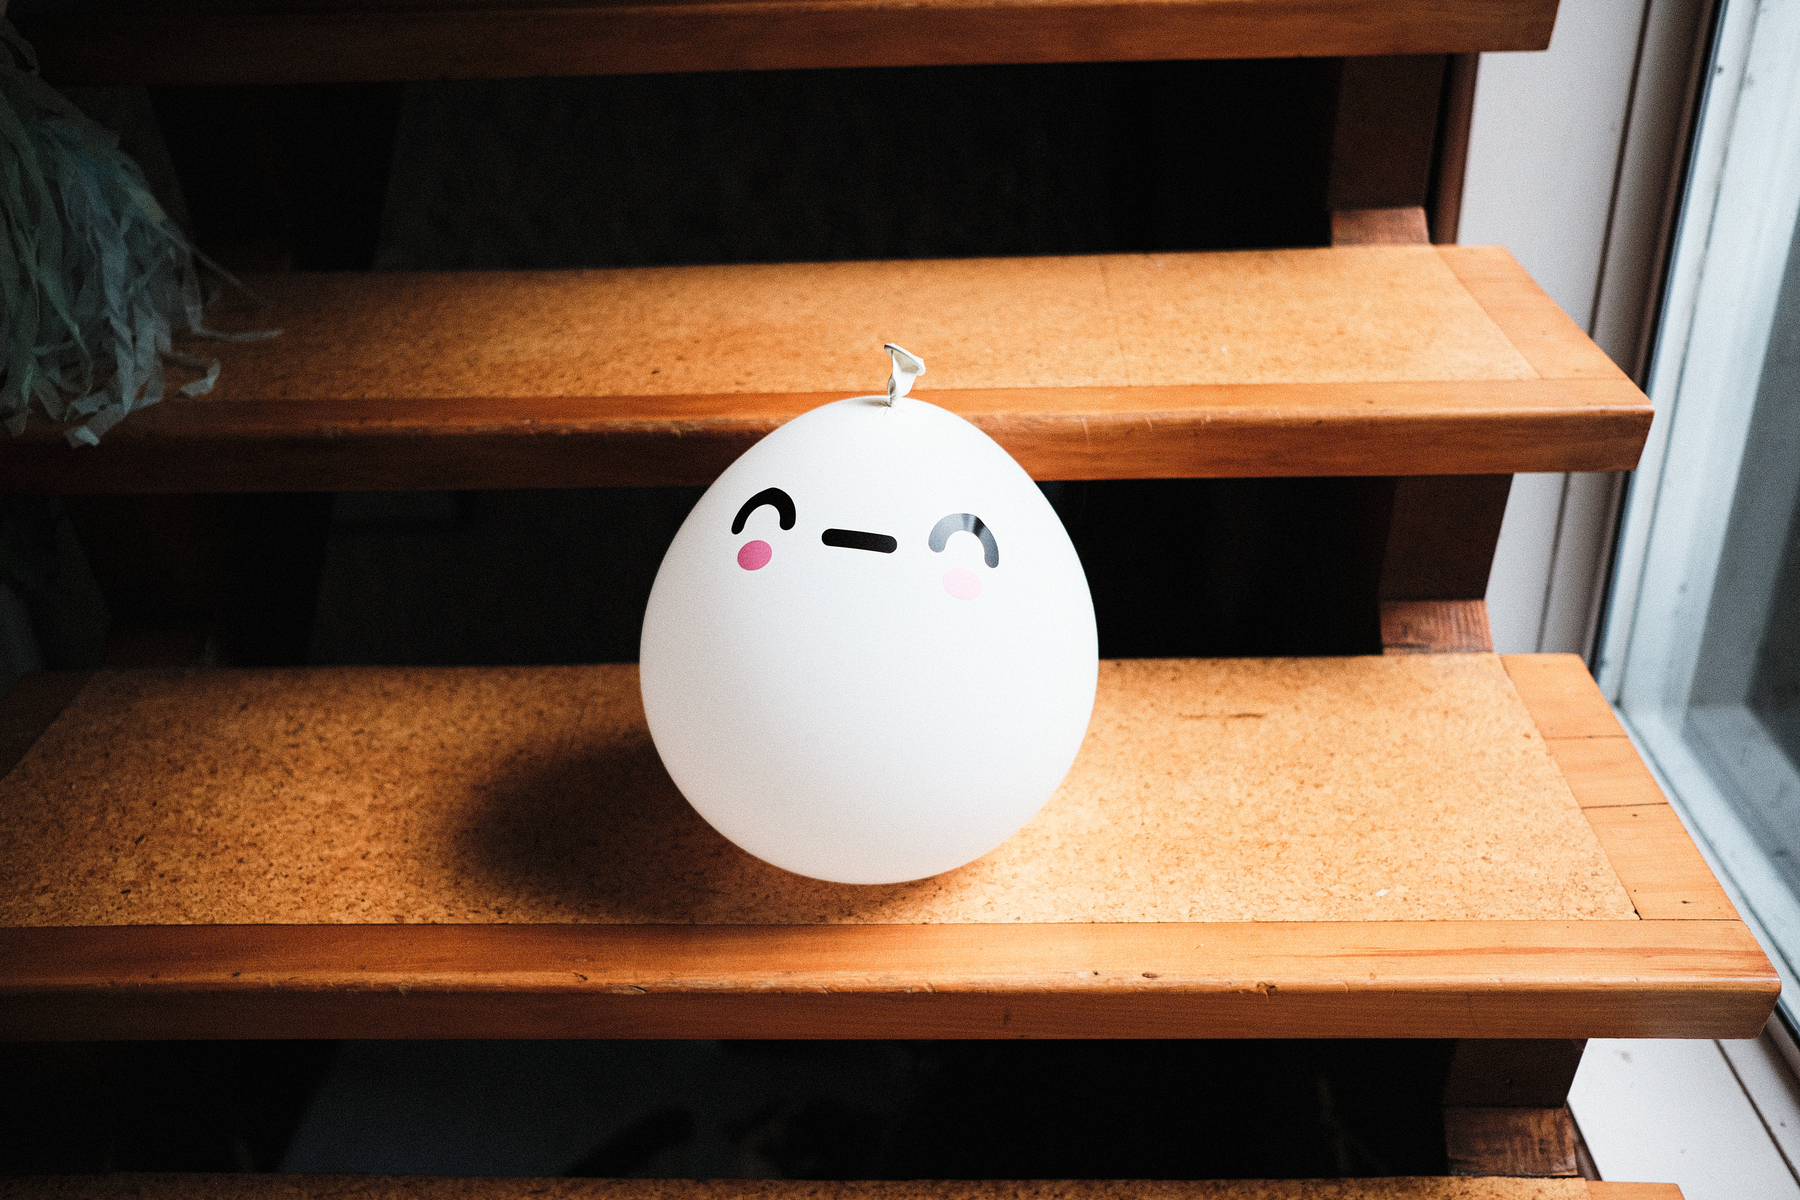 A balloon with a kawaii face on it, sitting on some wooden stairs